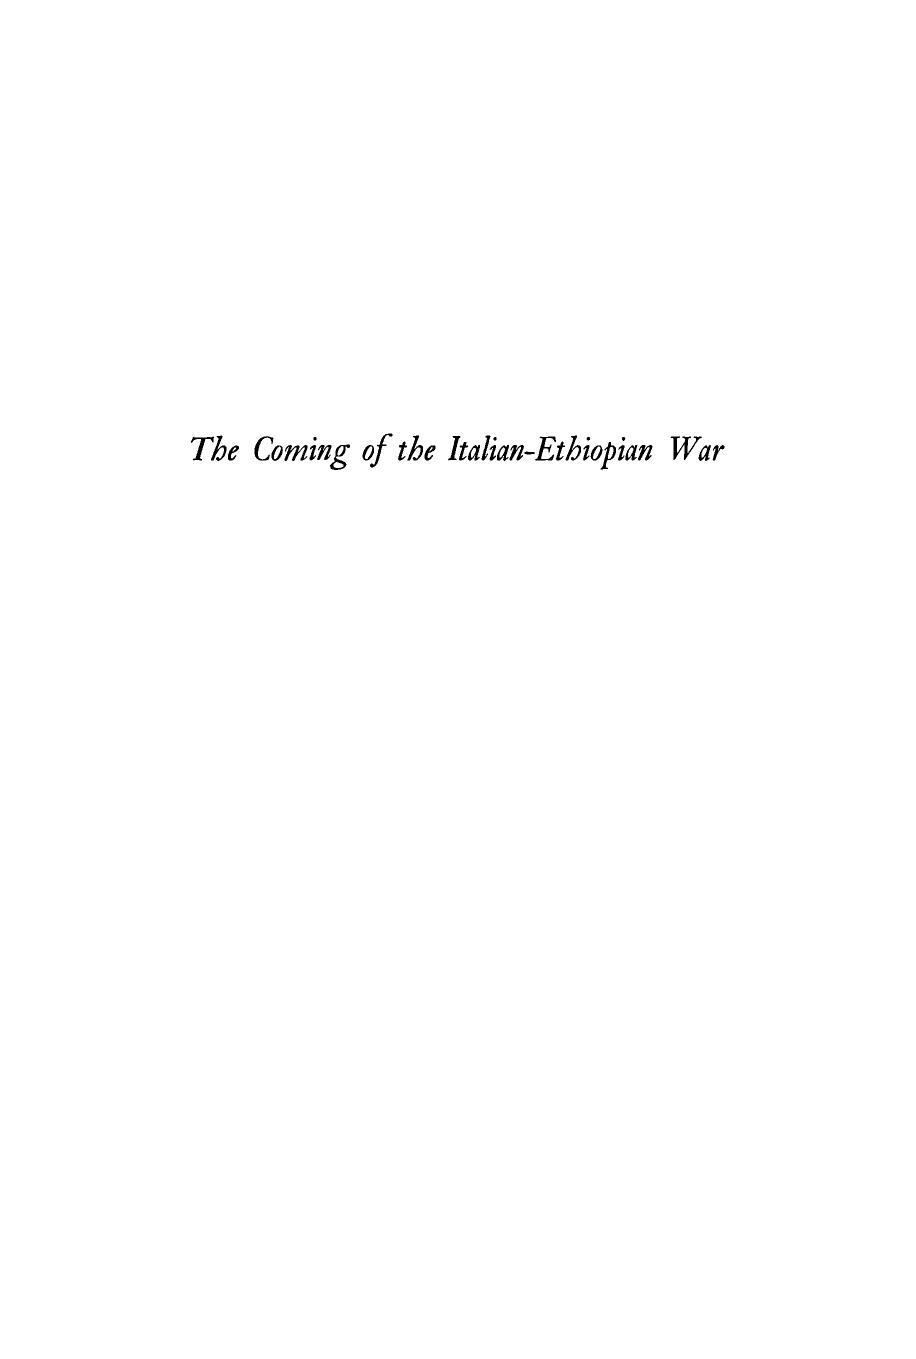 The Coming of the Italian-Ethiopian War by George W. Baer